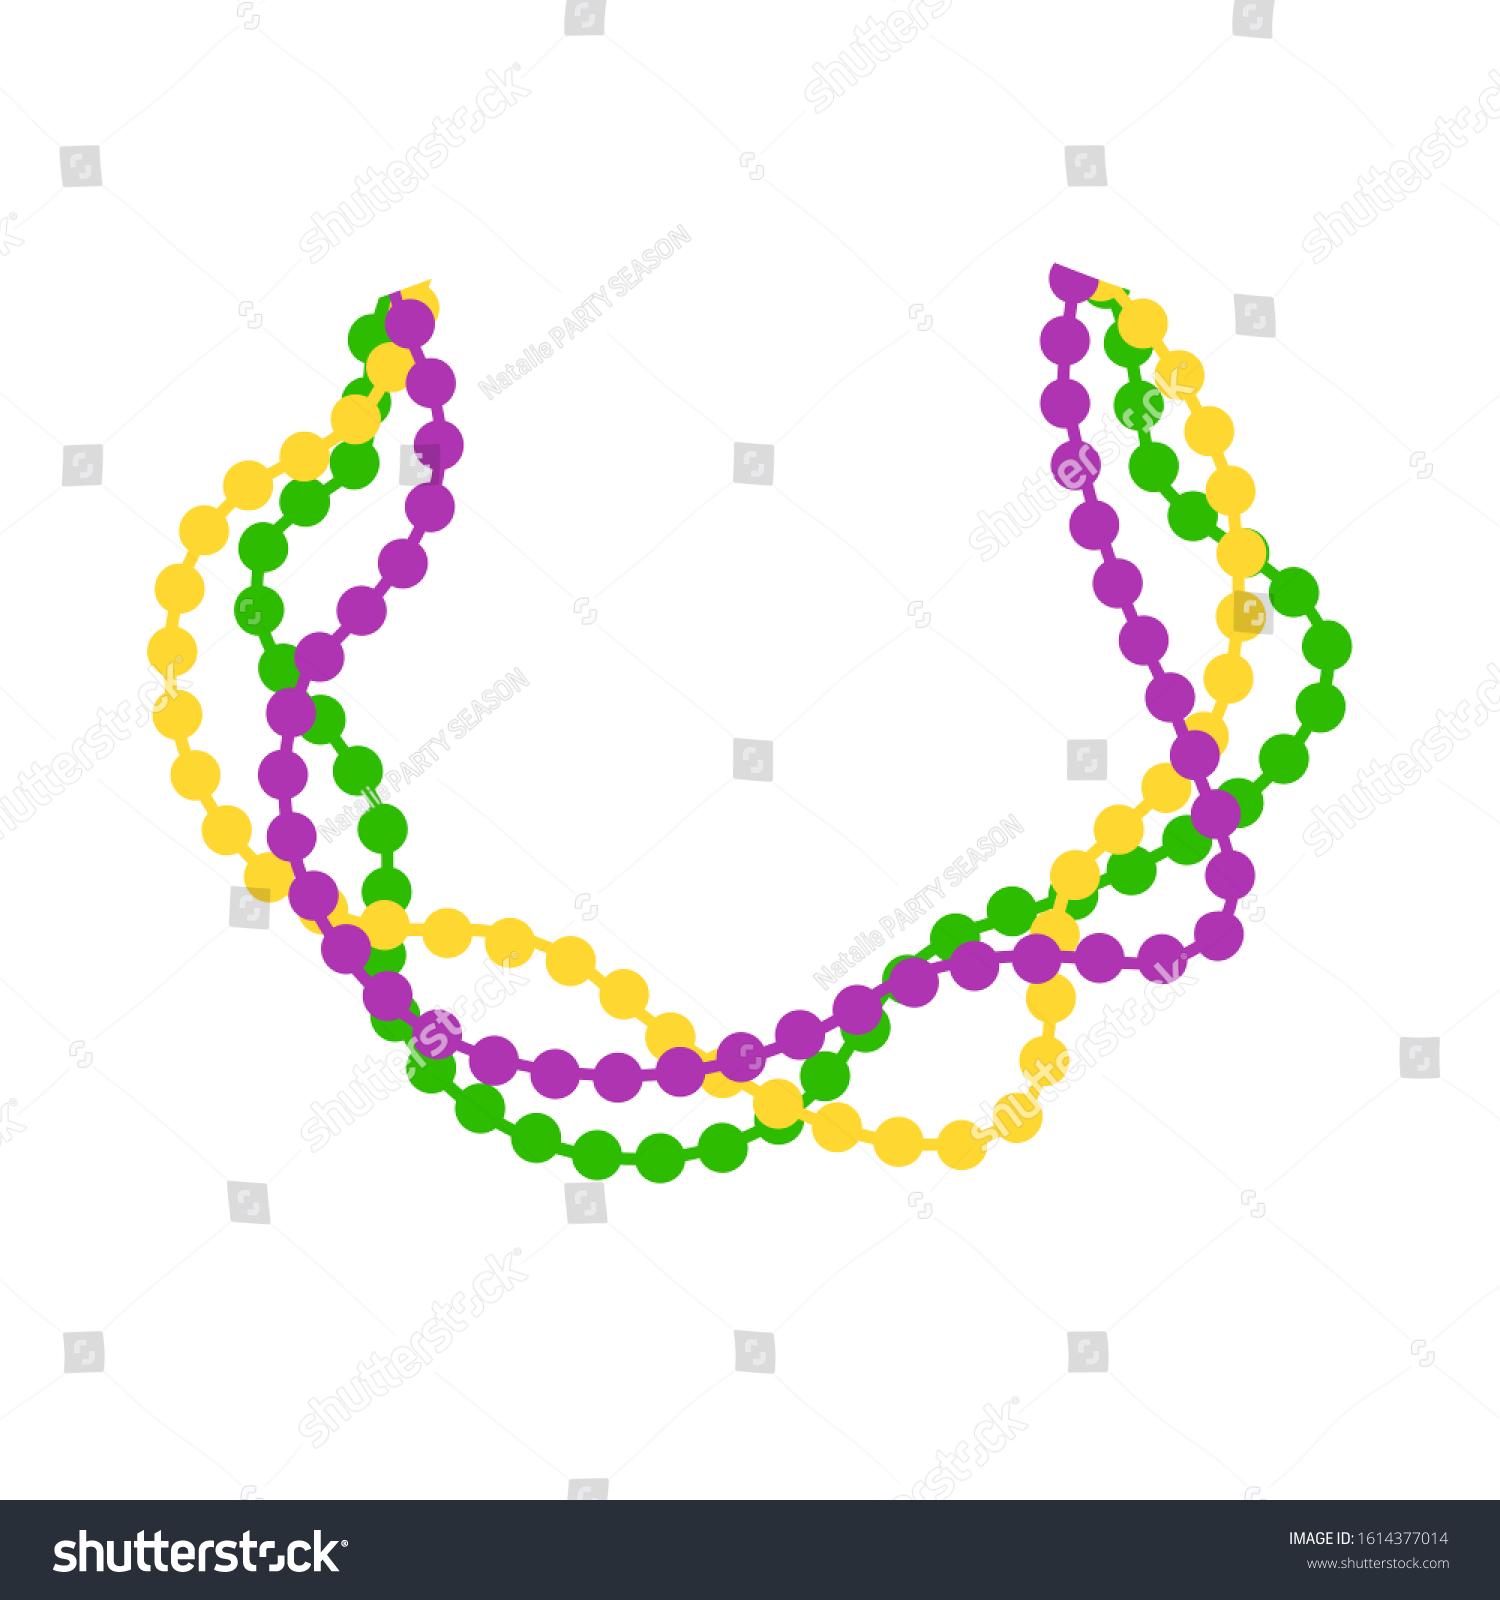 Download Clipart Beads Mardi Gras Svg Files Stock Vector Royalty Free 1614377014